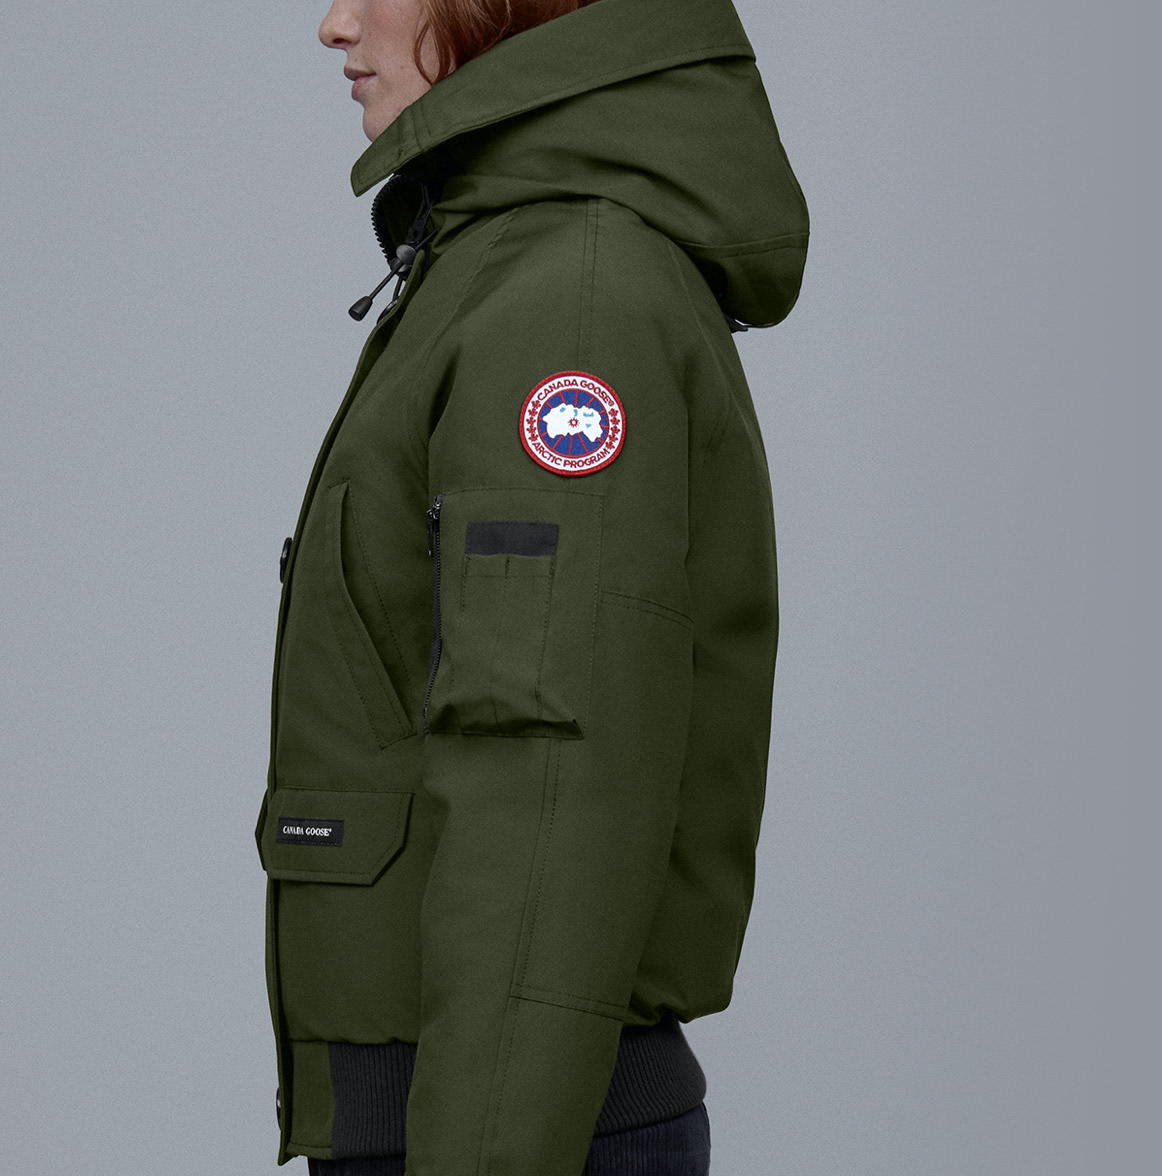 Thermal Experience Index | TEI | Canada Goose